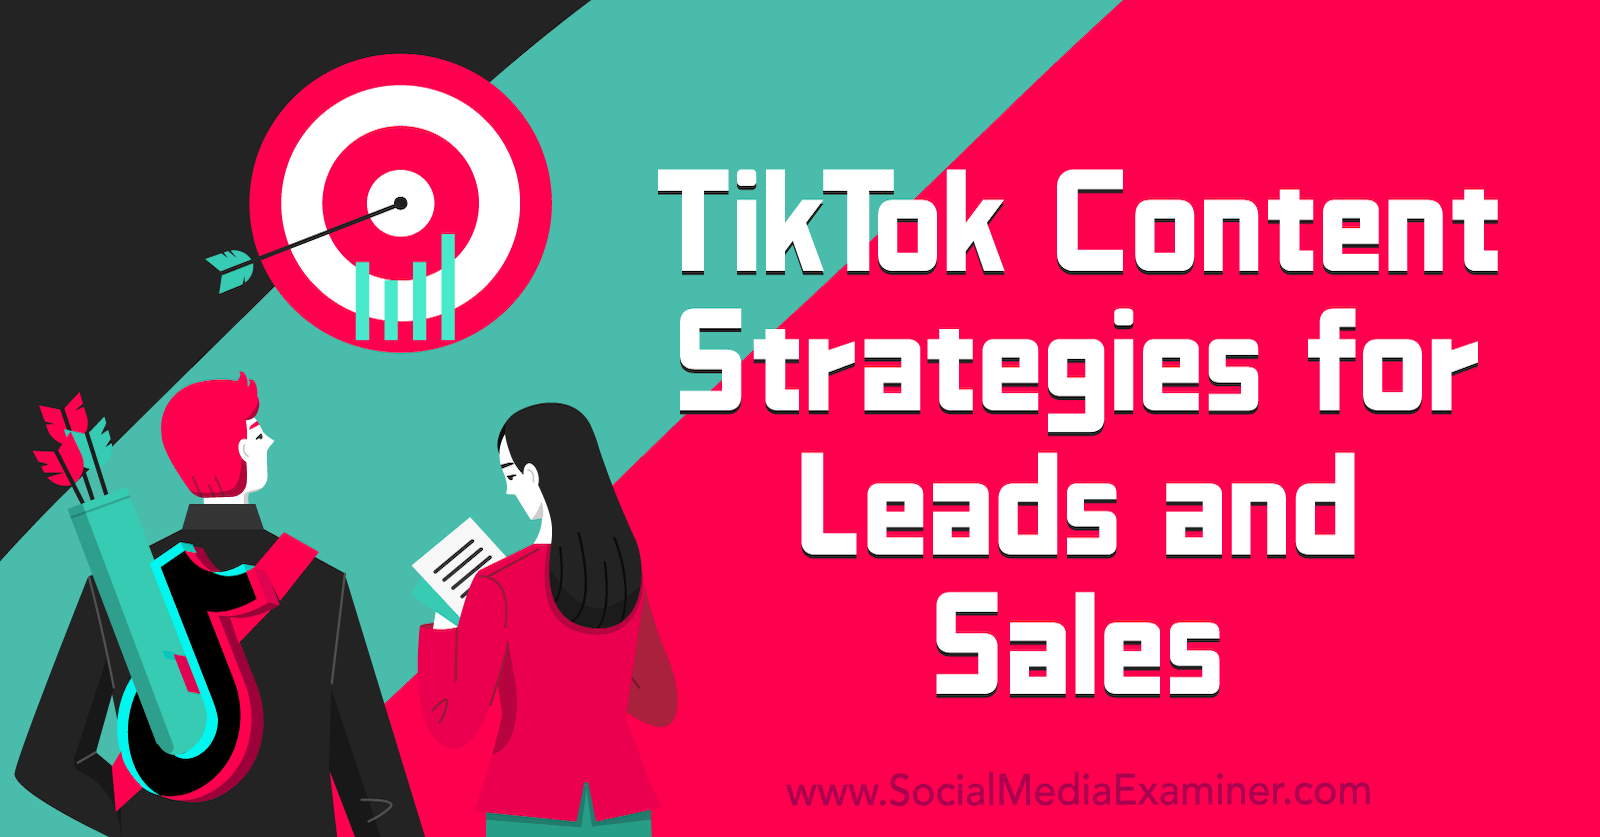 TikTok Content Strategies for Leads and Sales-Social Media Examiner